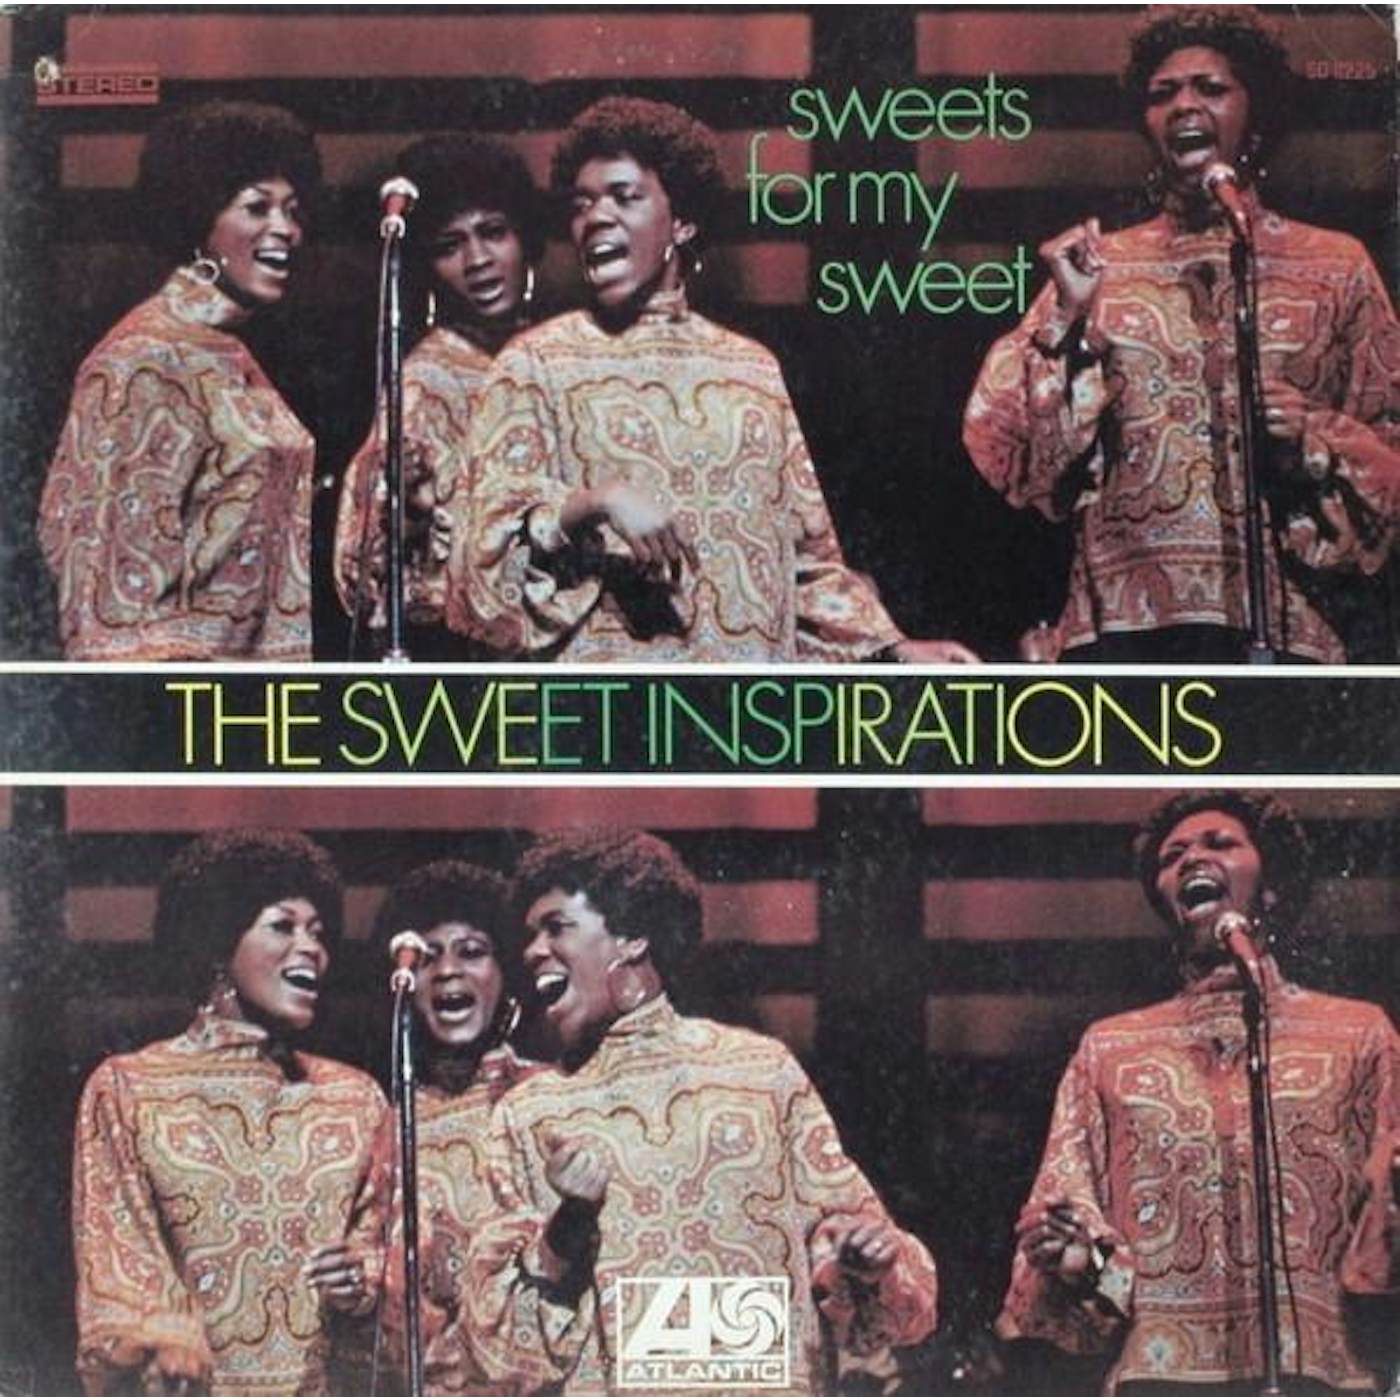 The Sweet Inspirations SWEETS FOR MY SWEET CD